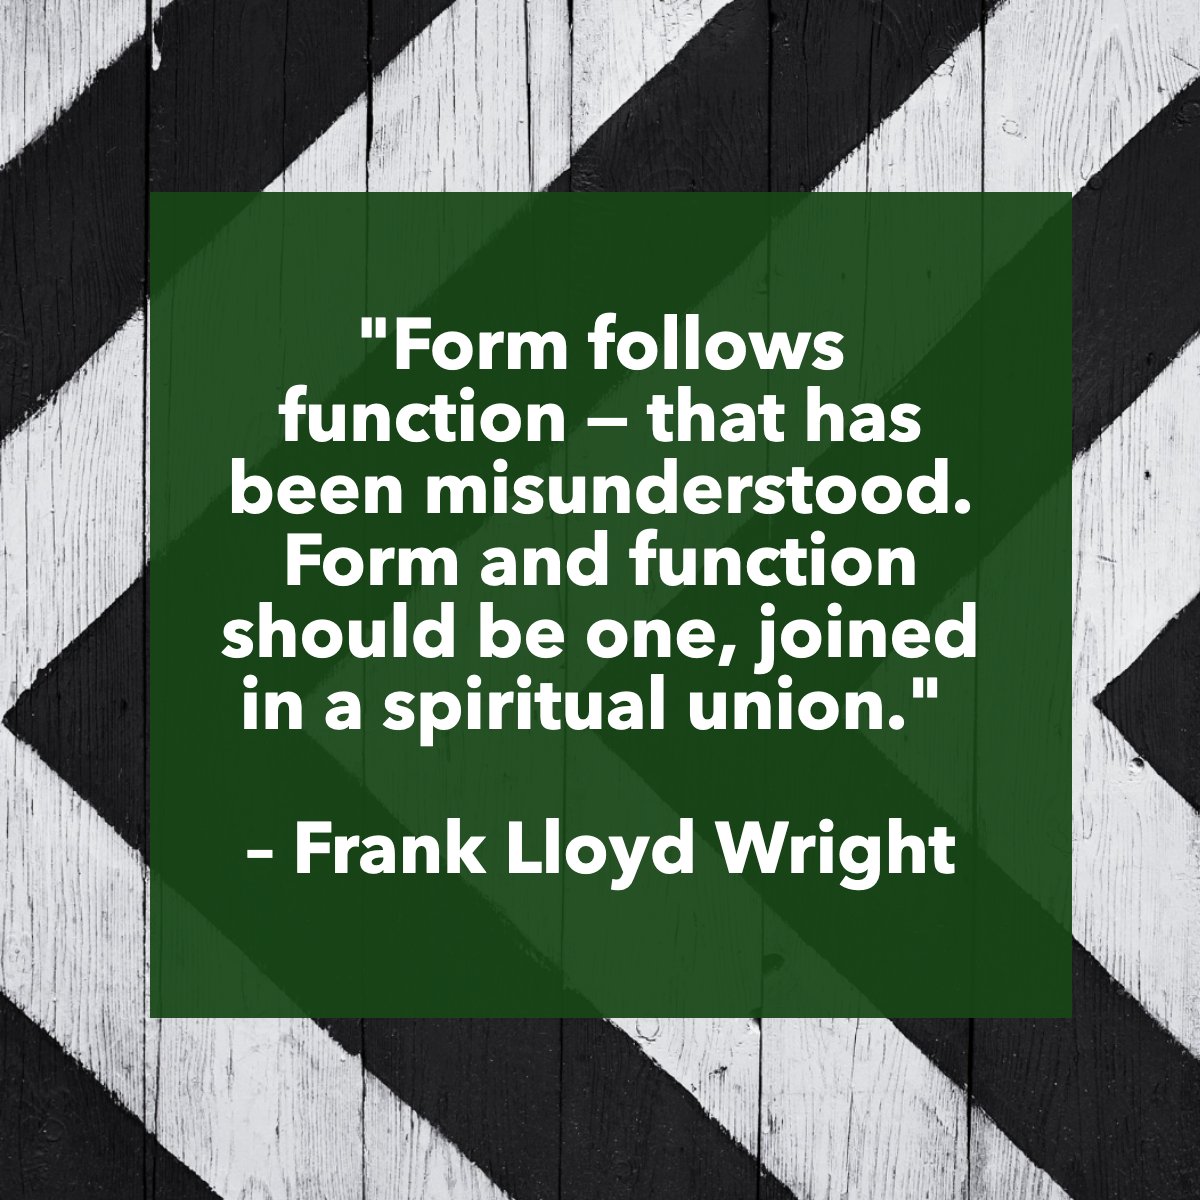 'Form follows function—that has been misunderstood. Form and function should be one, joined in a spiritual union.'
― Frank Lloyd Wright 

#quoteoftheday #form #function #design #architecture #franklloydwright #blackandwhite